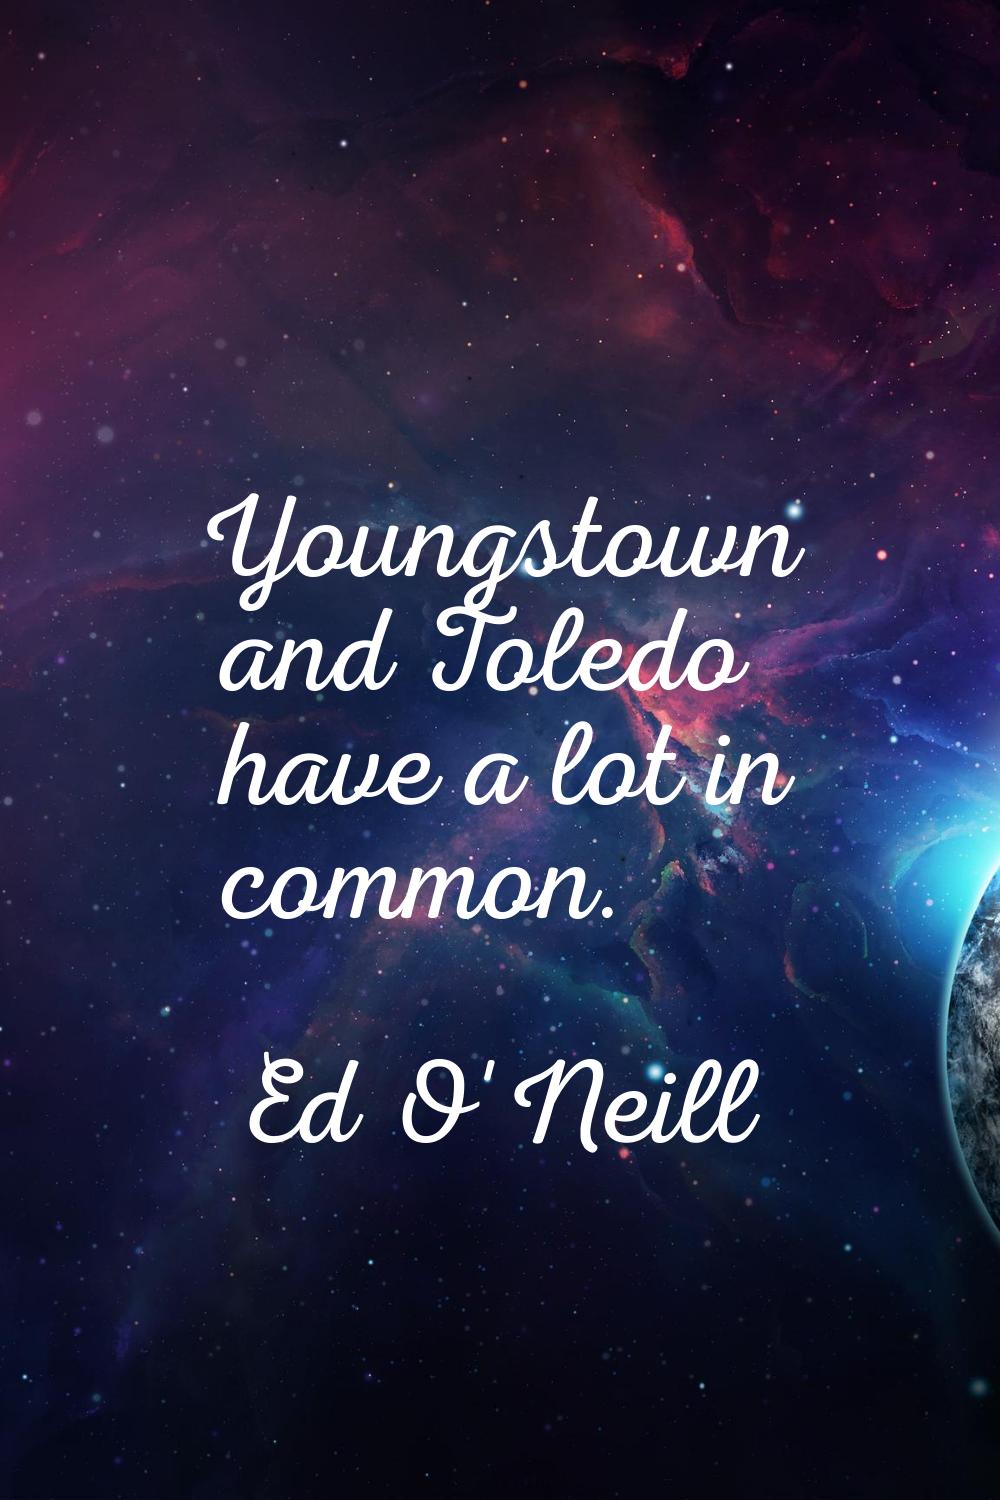 Youngstown and Toledo have a lot in common.